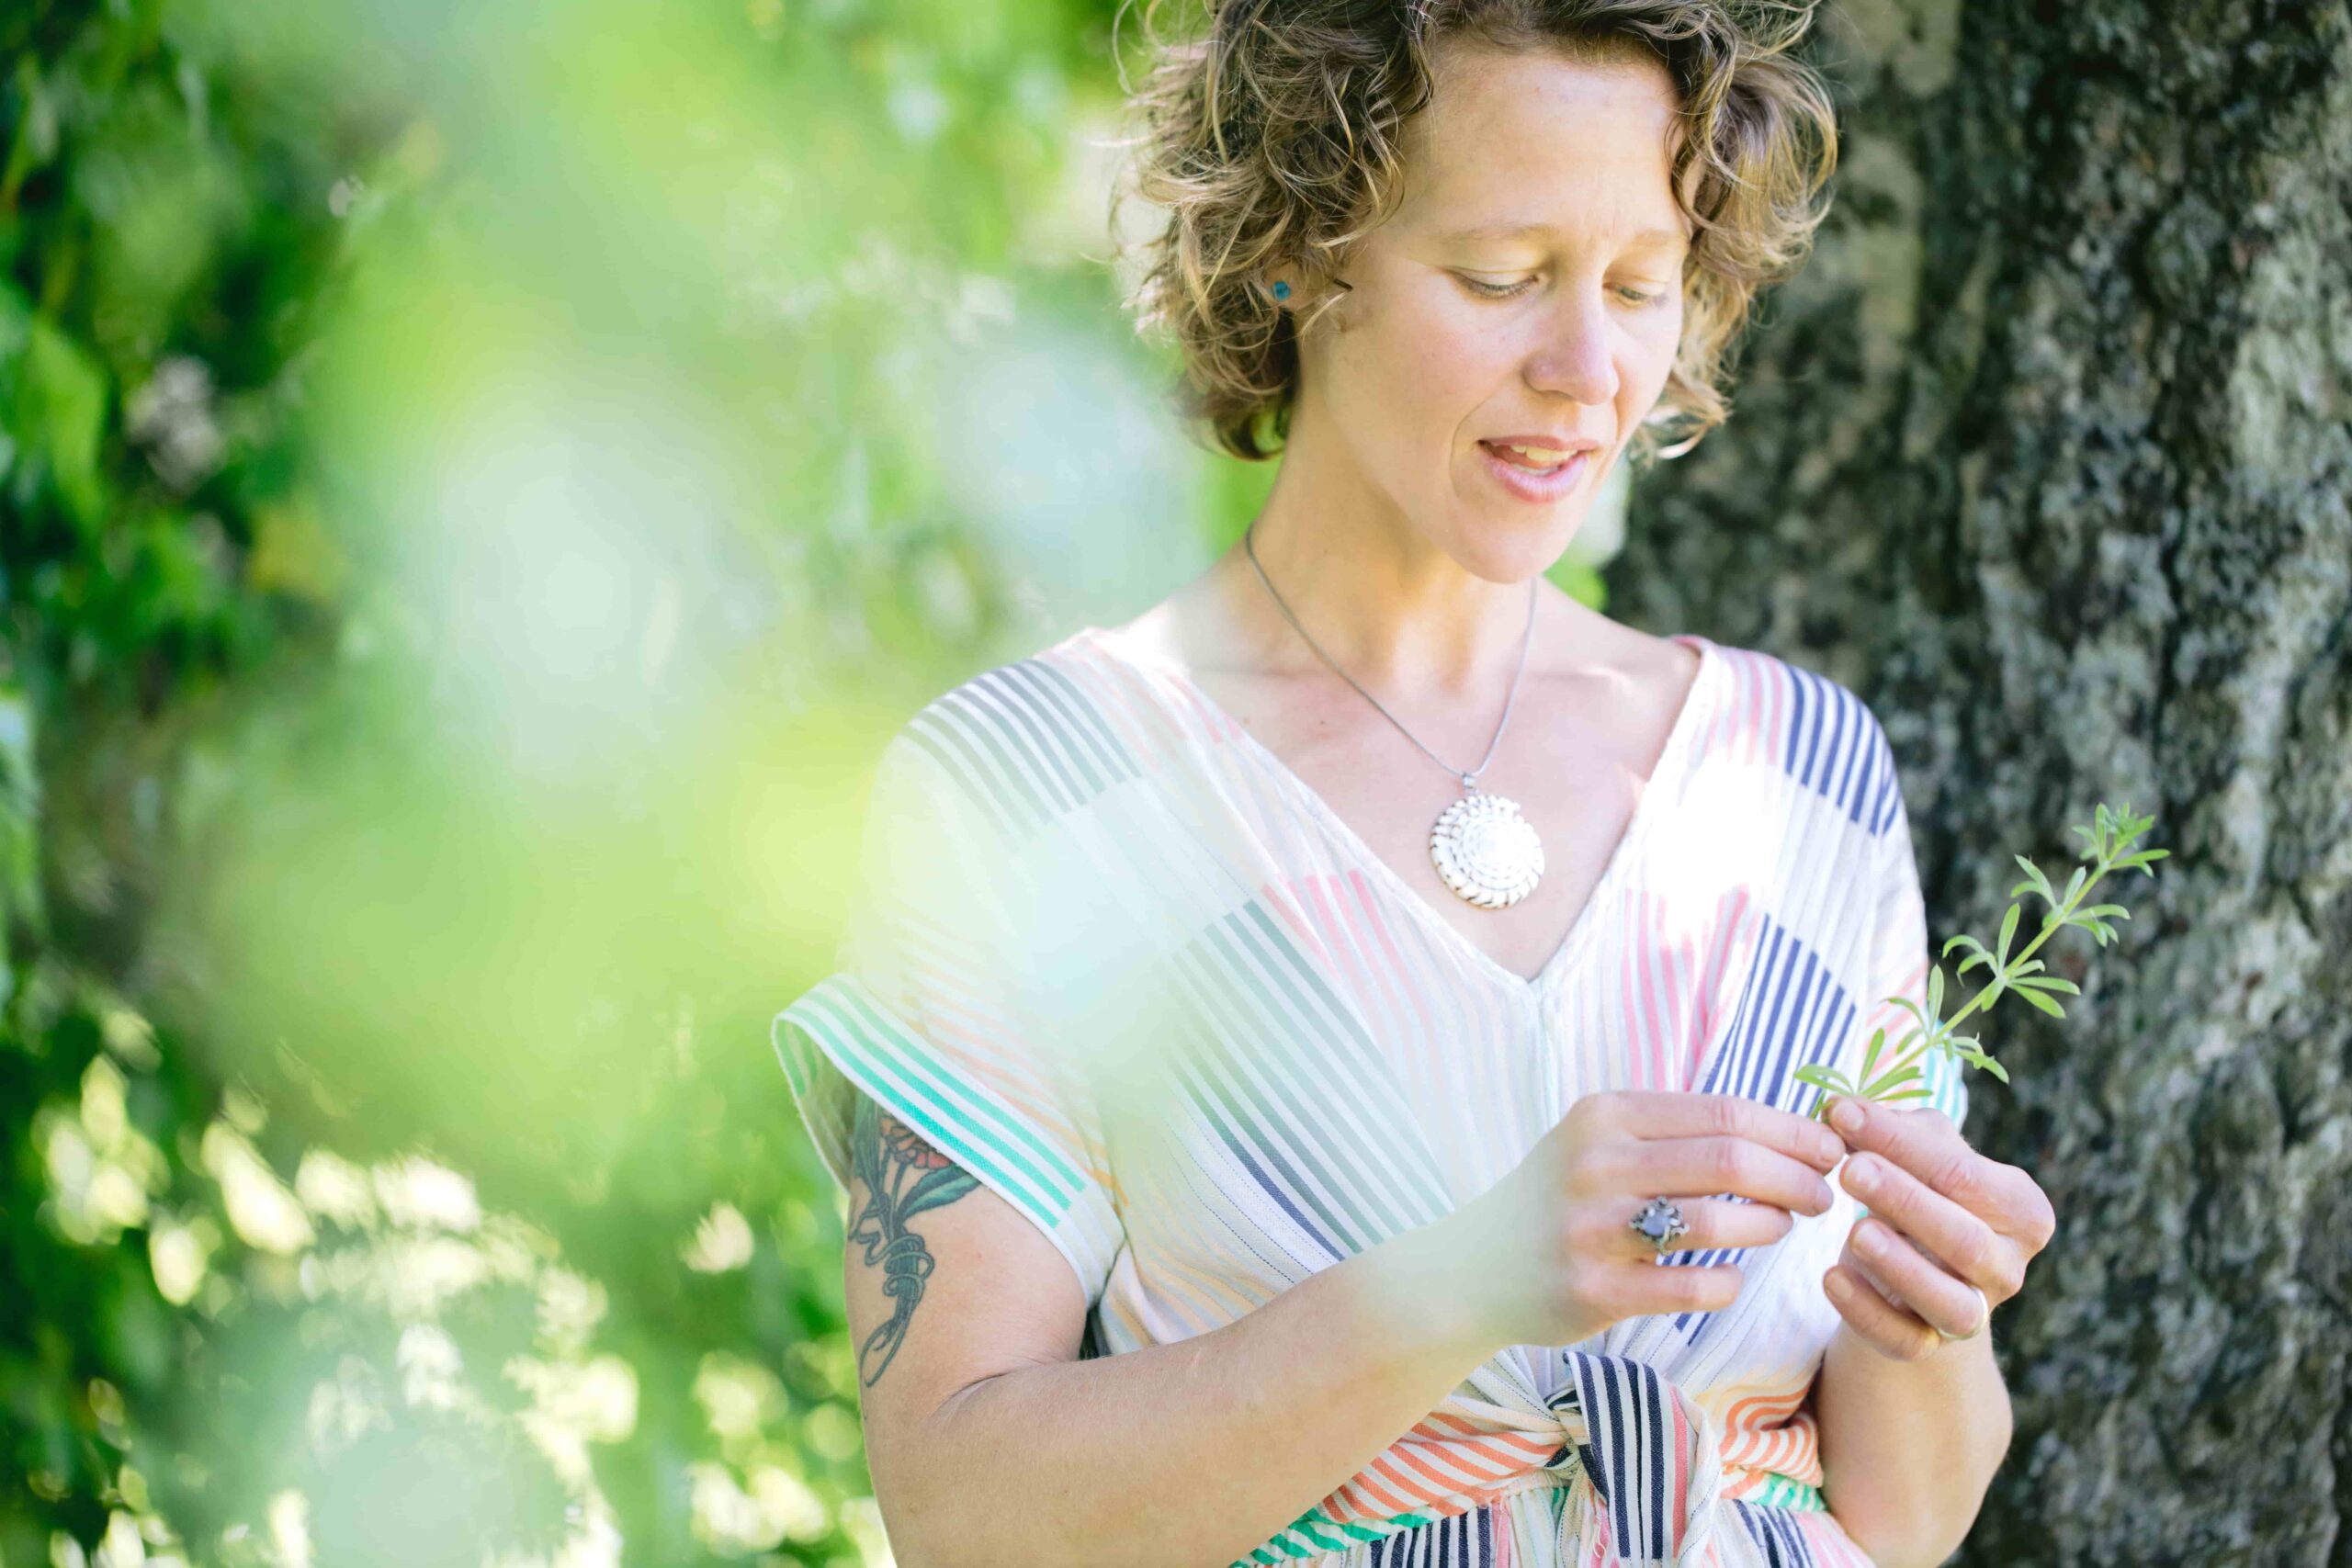 Dr. Sarah Sue Myers teaches Plant Medicine and connects the self to nature.